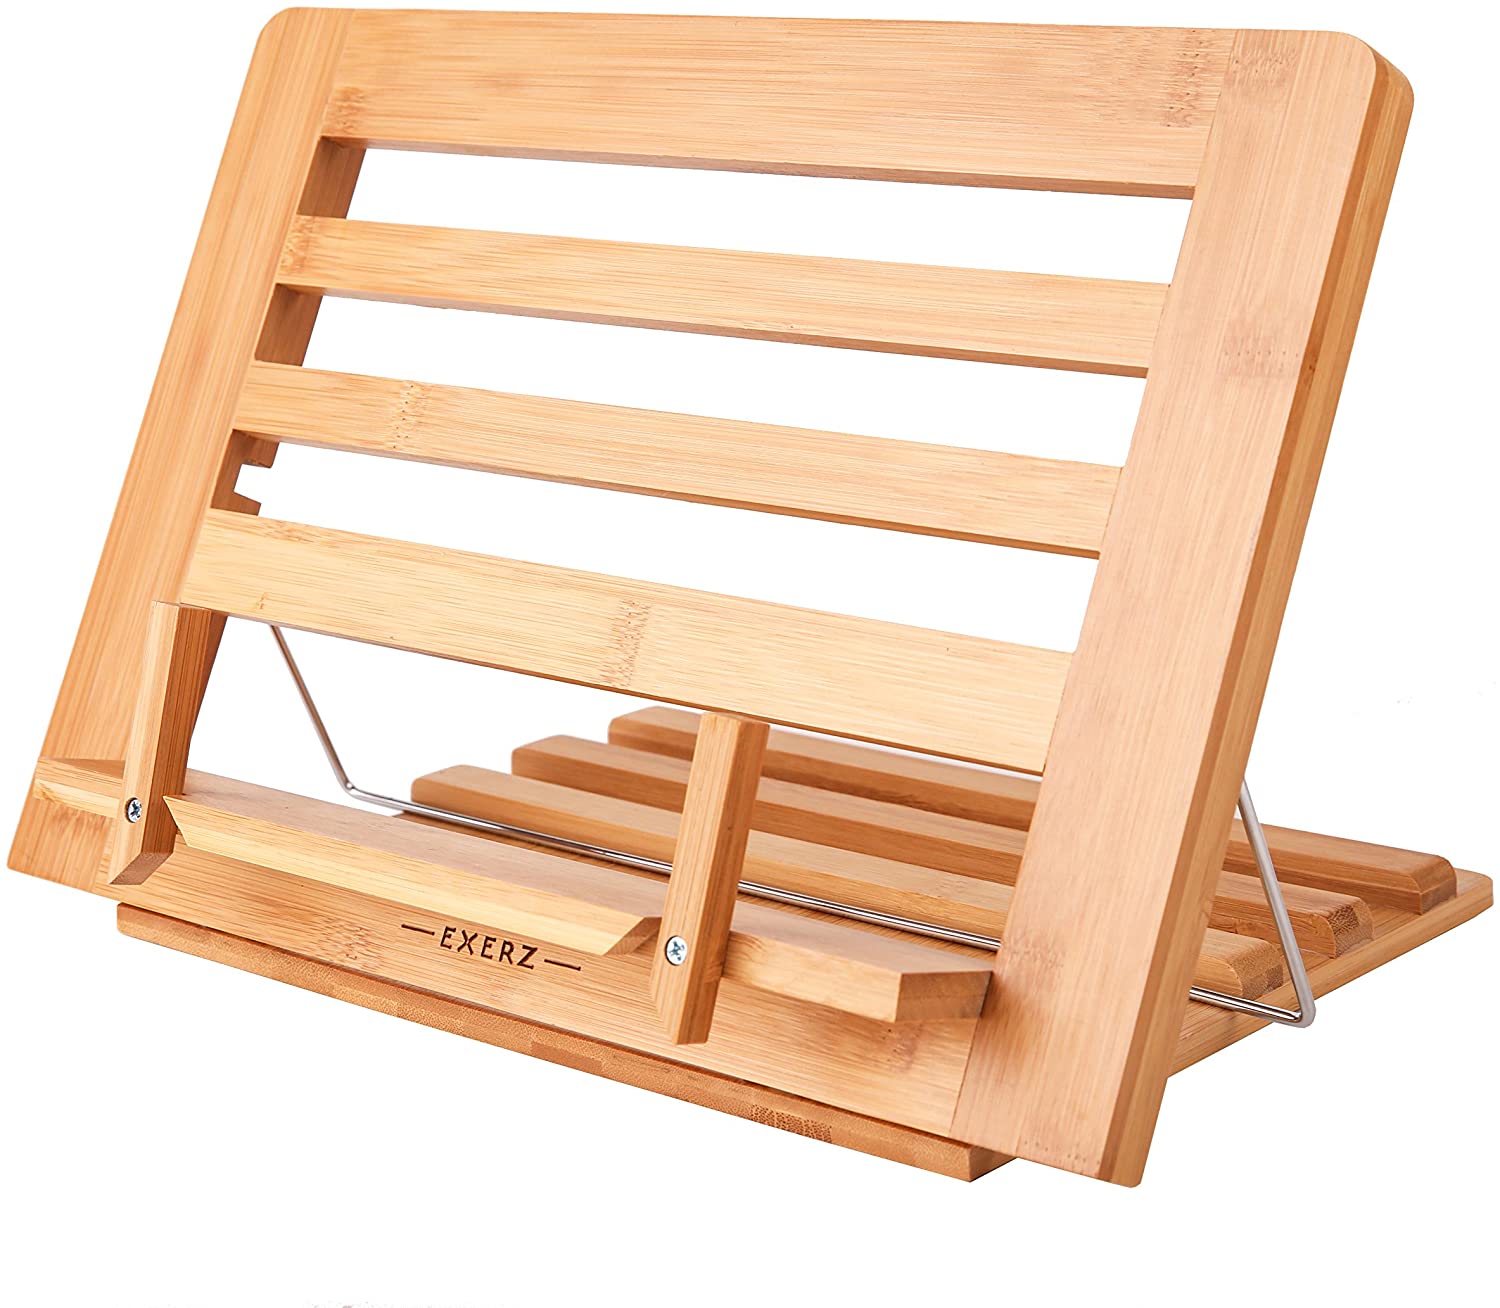 Exerz Bamboo Easel Reading Stand - Cookbook Stand - Bamboo